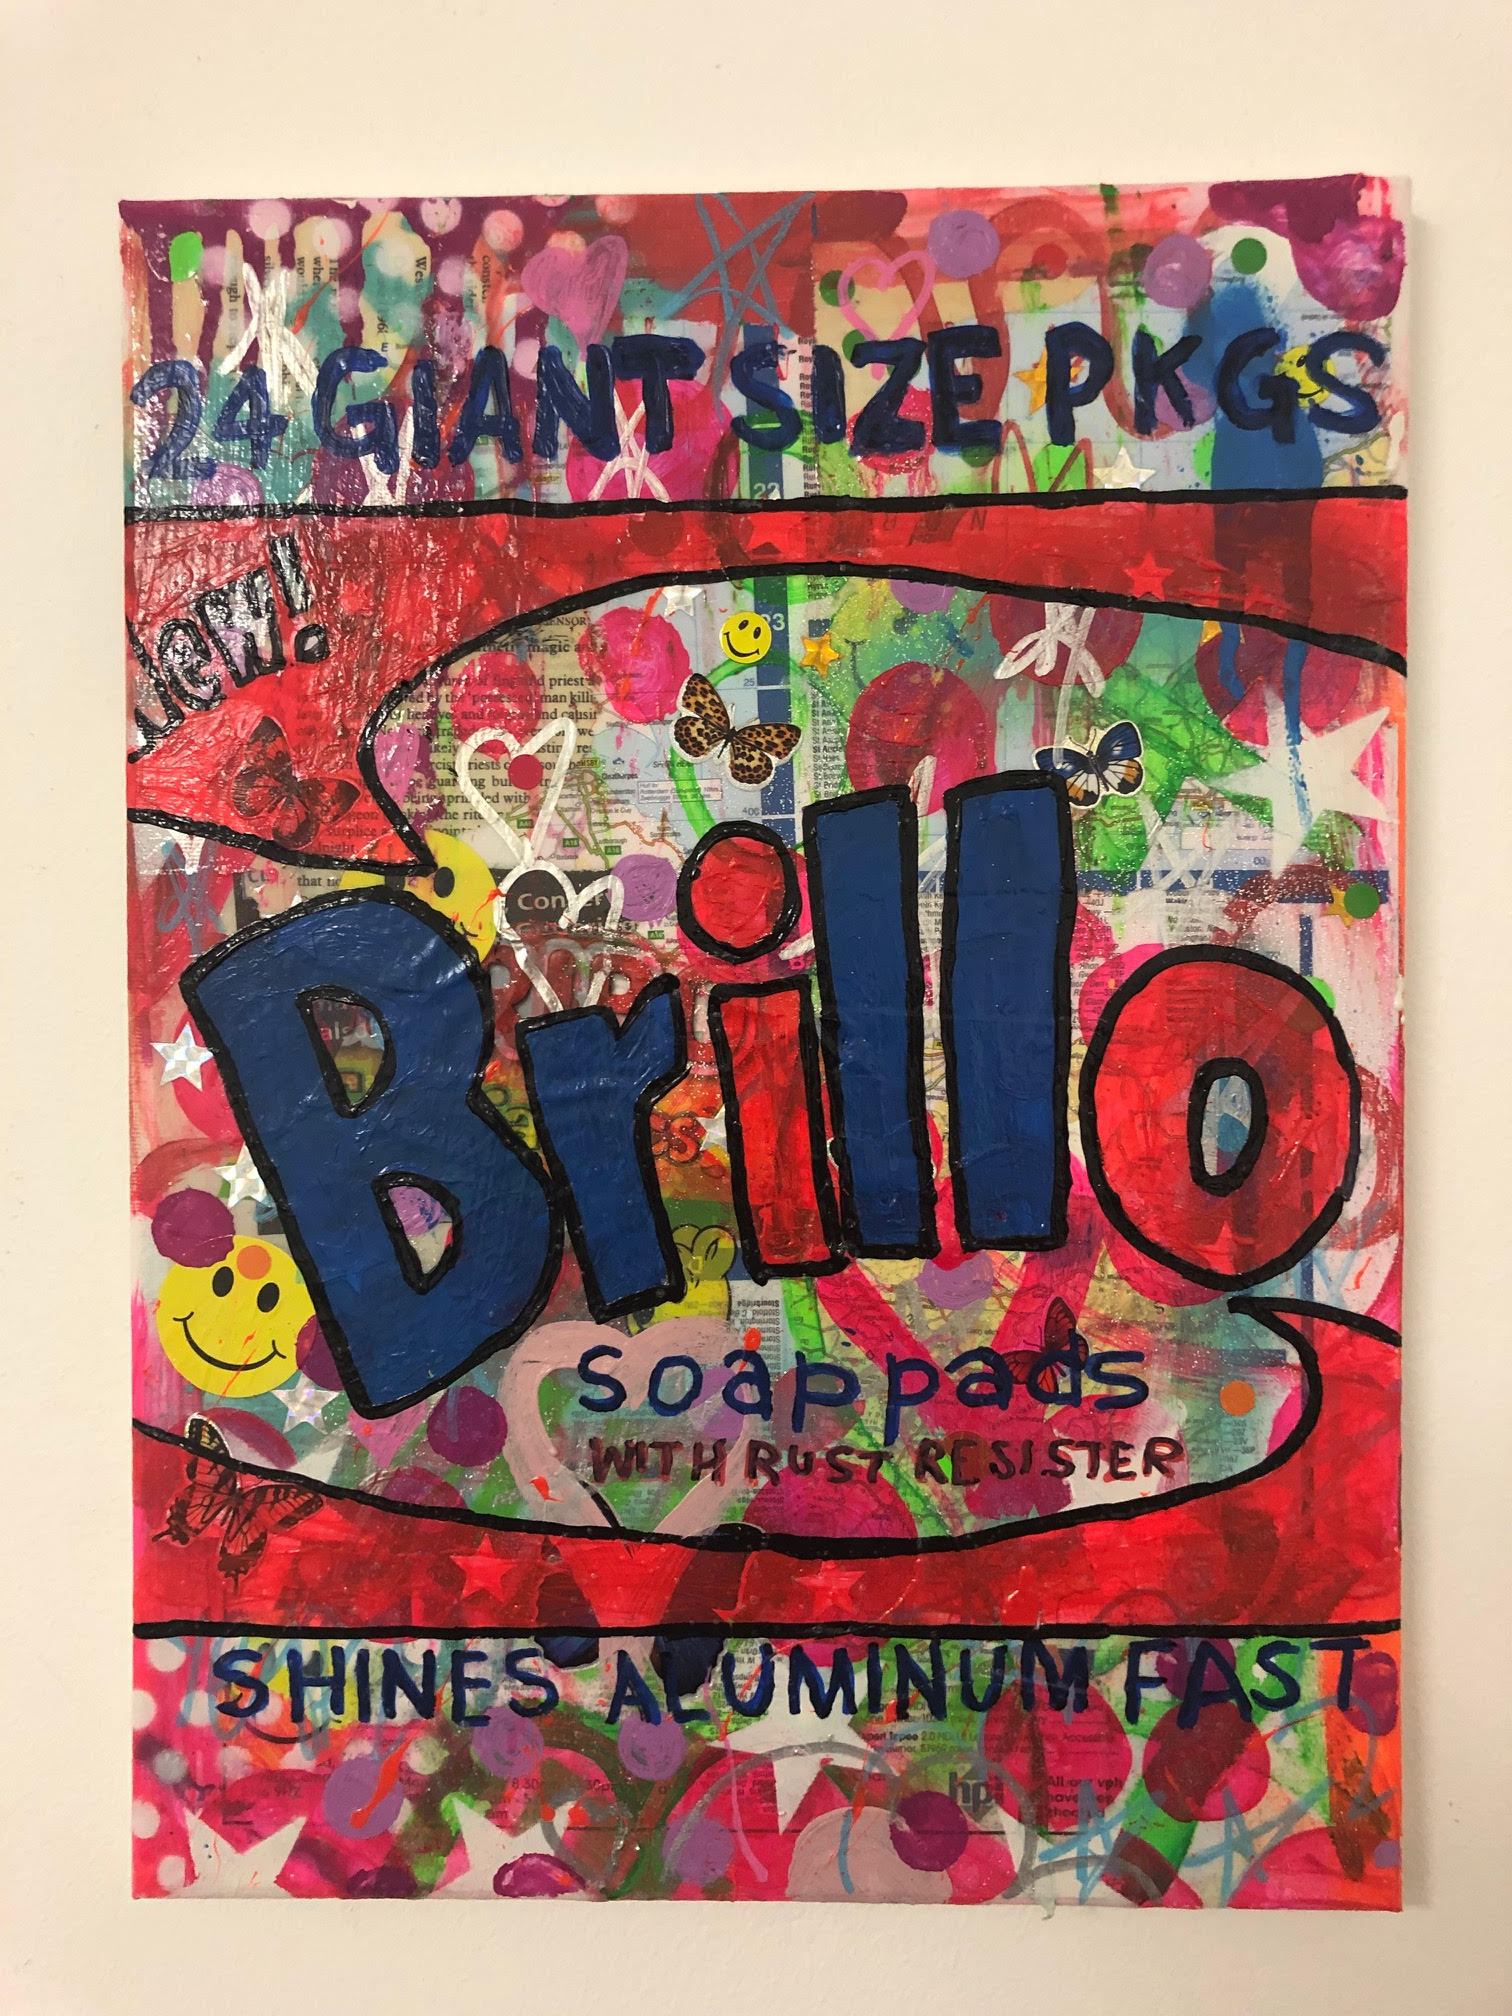 Groove is the Art by Barrie J Davies 2019, Mixed media on Canvas, 20cm x 25cm, Unframed. Barrie J Davies is an Artist - Pop Art and Street art inspired Artist based in Brighton England UK - Pop Art Paintings, Street Art Prints & Editions available.